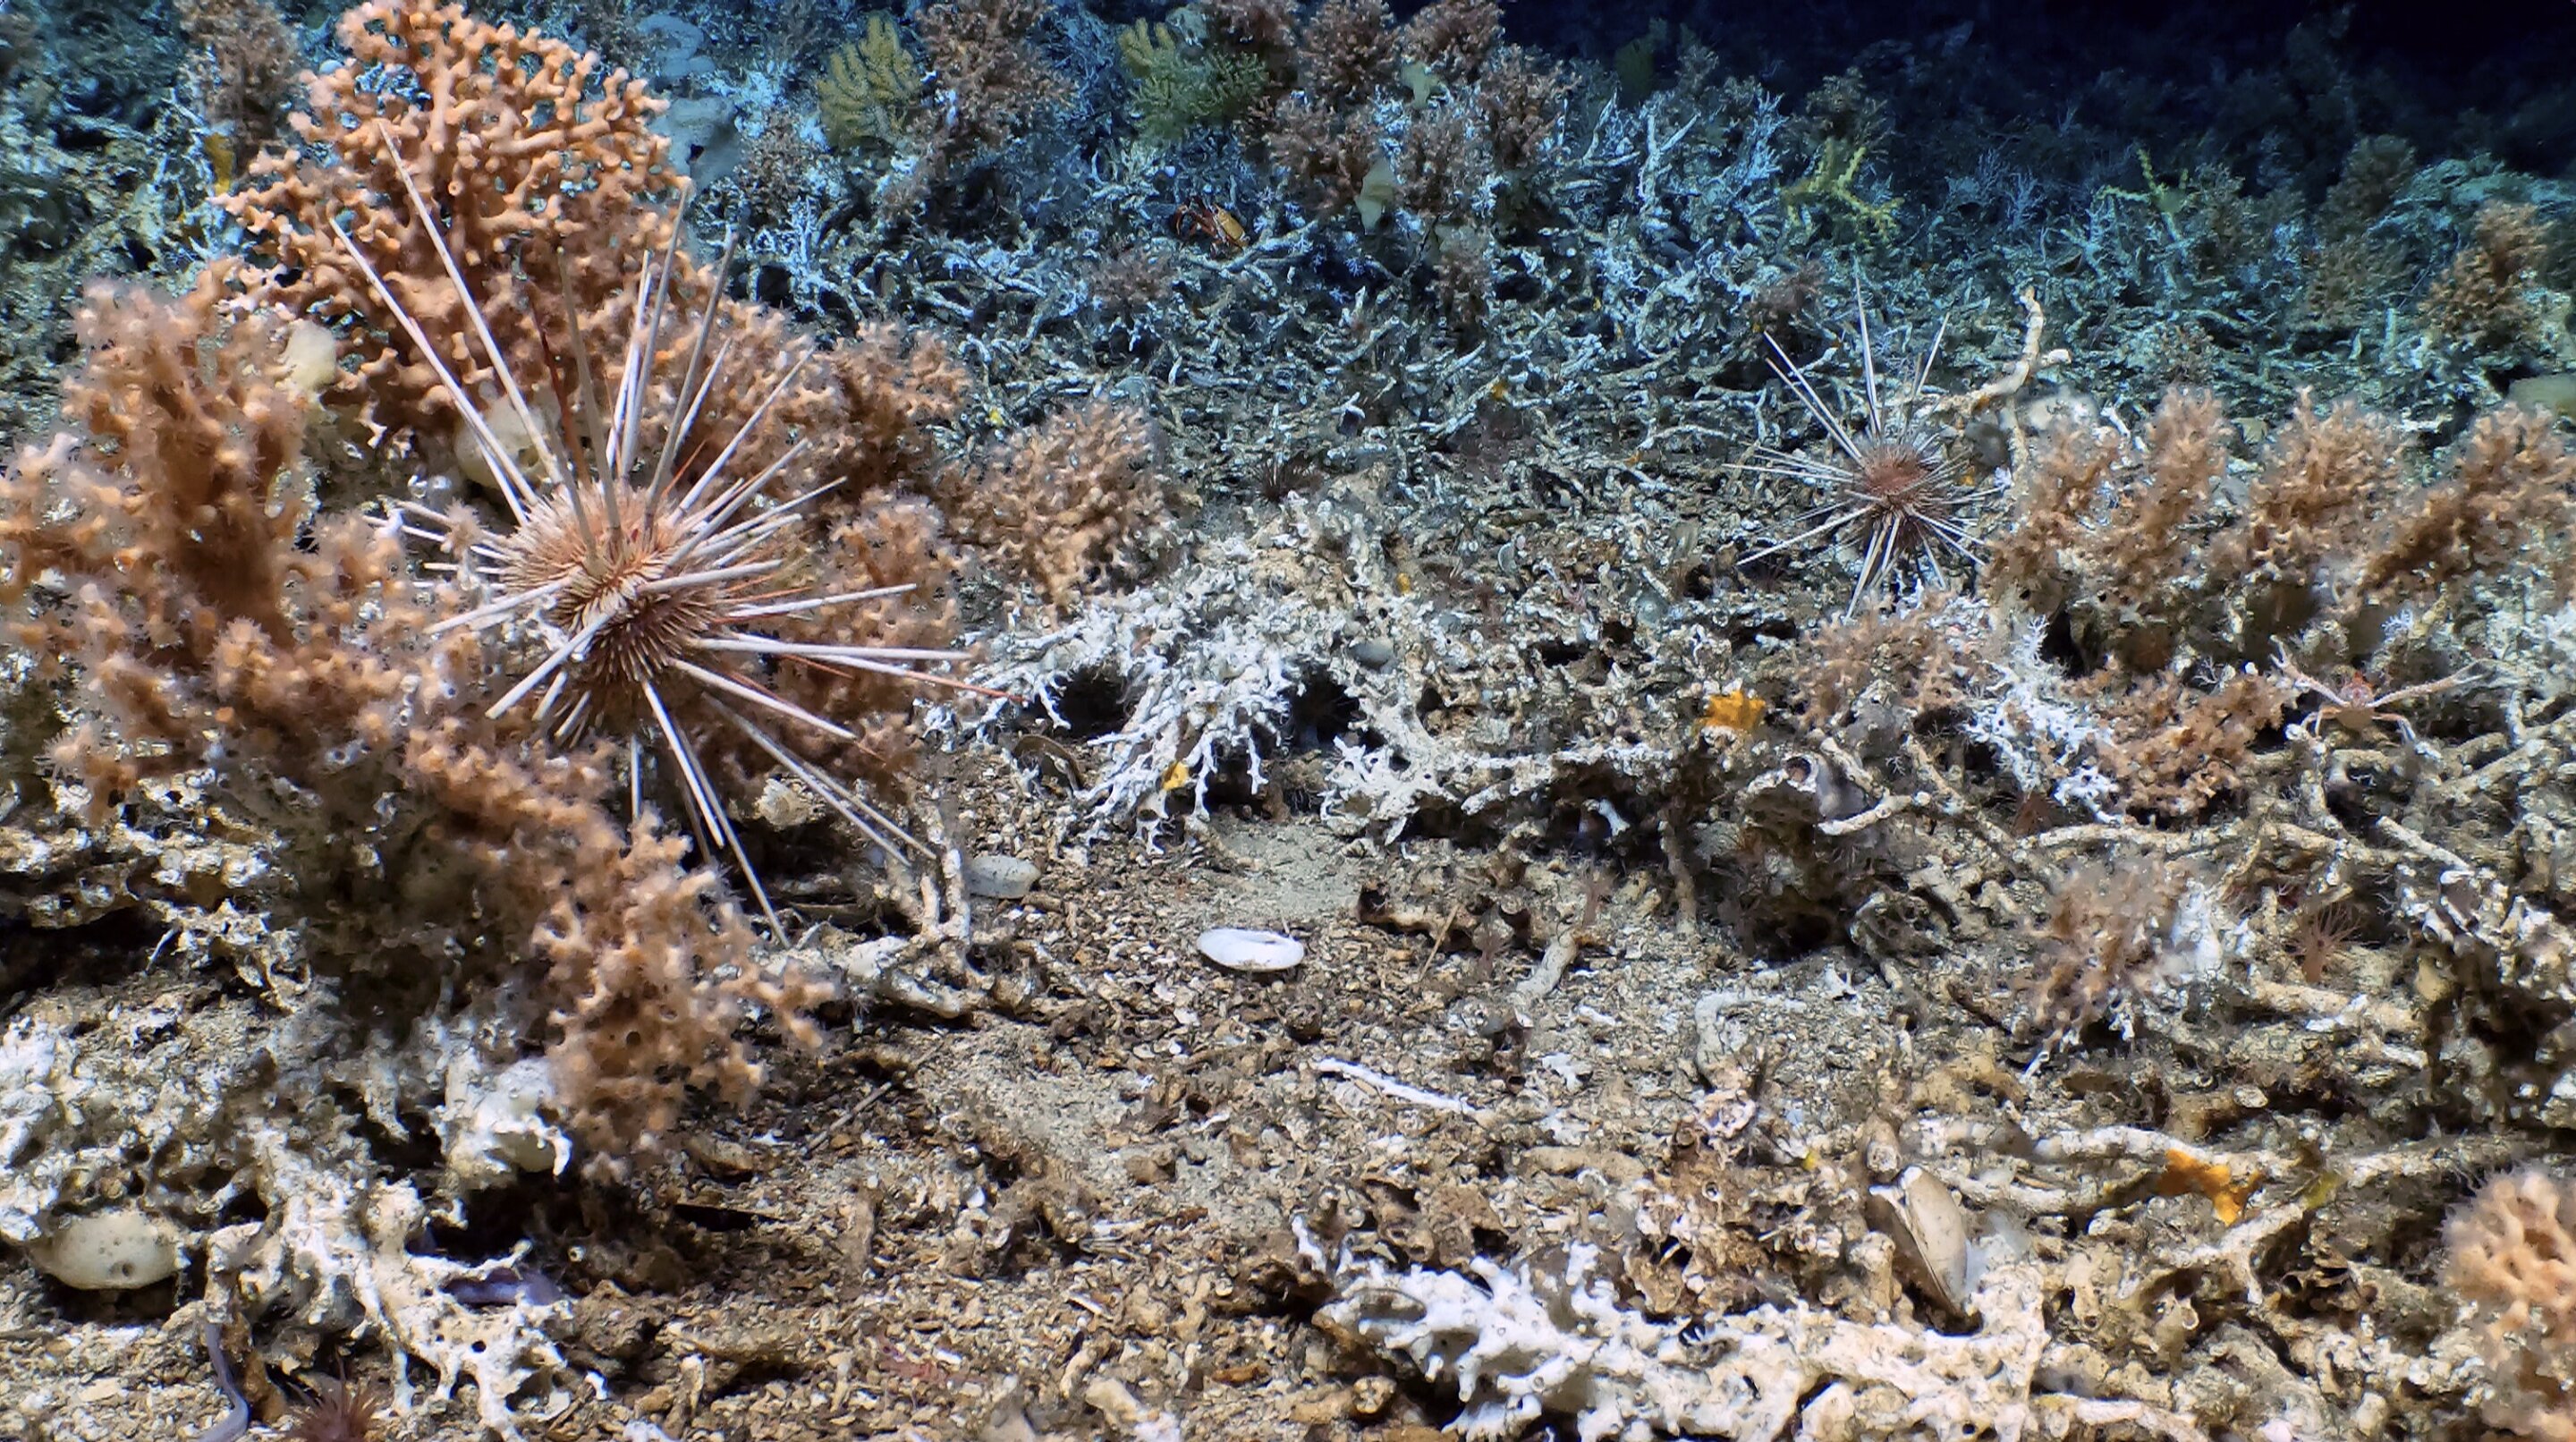 New Coral Reef Discovered Near Galapagos Islands